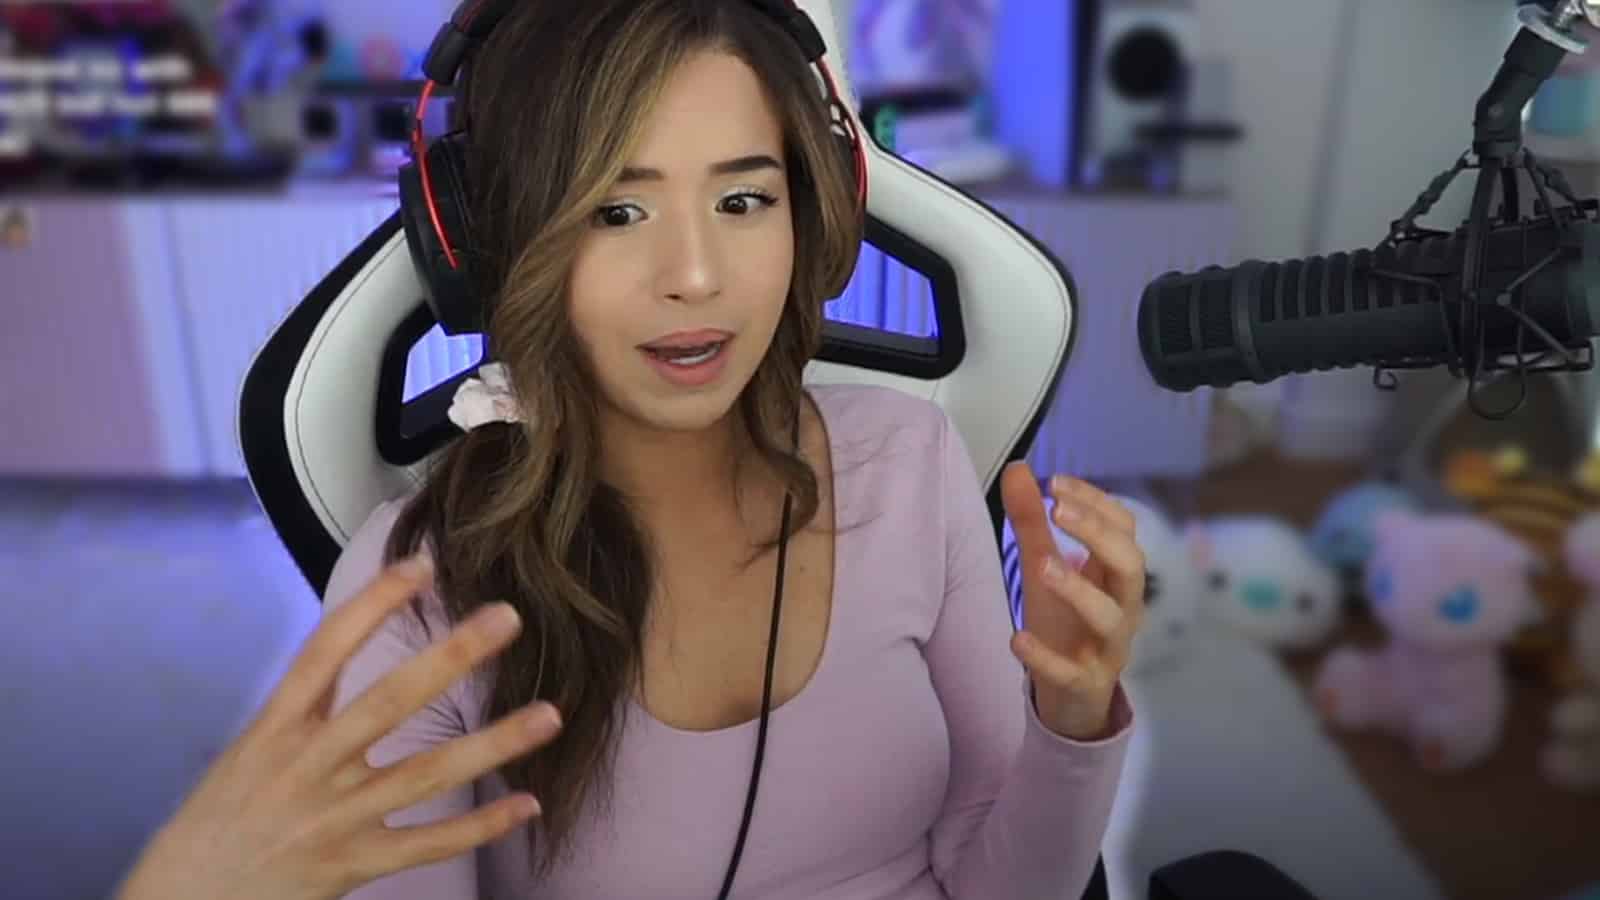 Pokimane gesturing on Twitch stream after being asked about esports orgs.